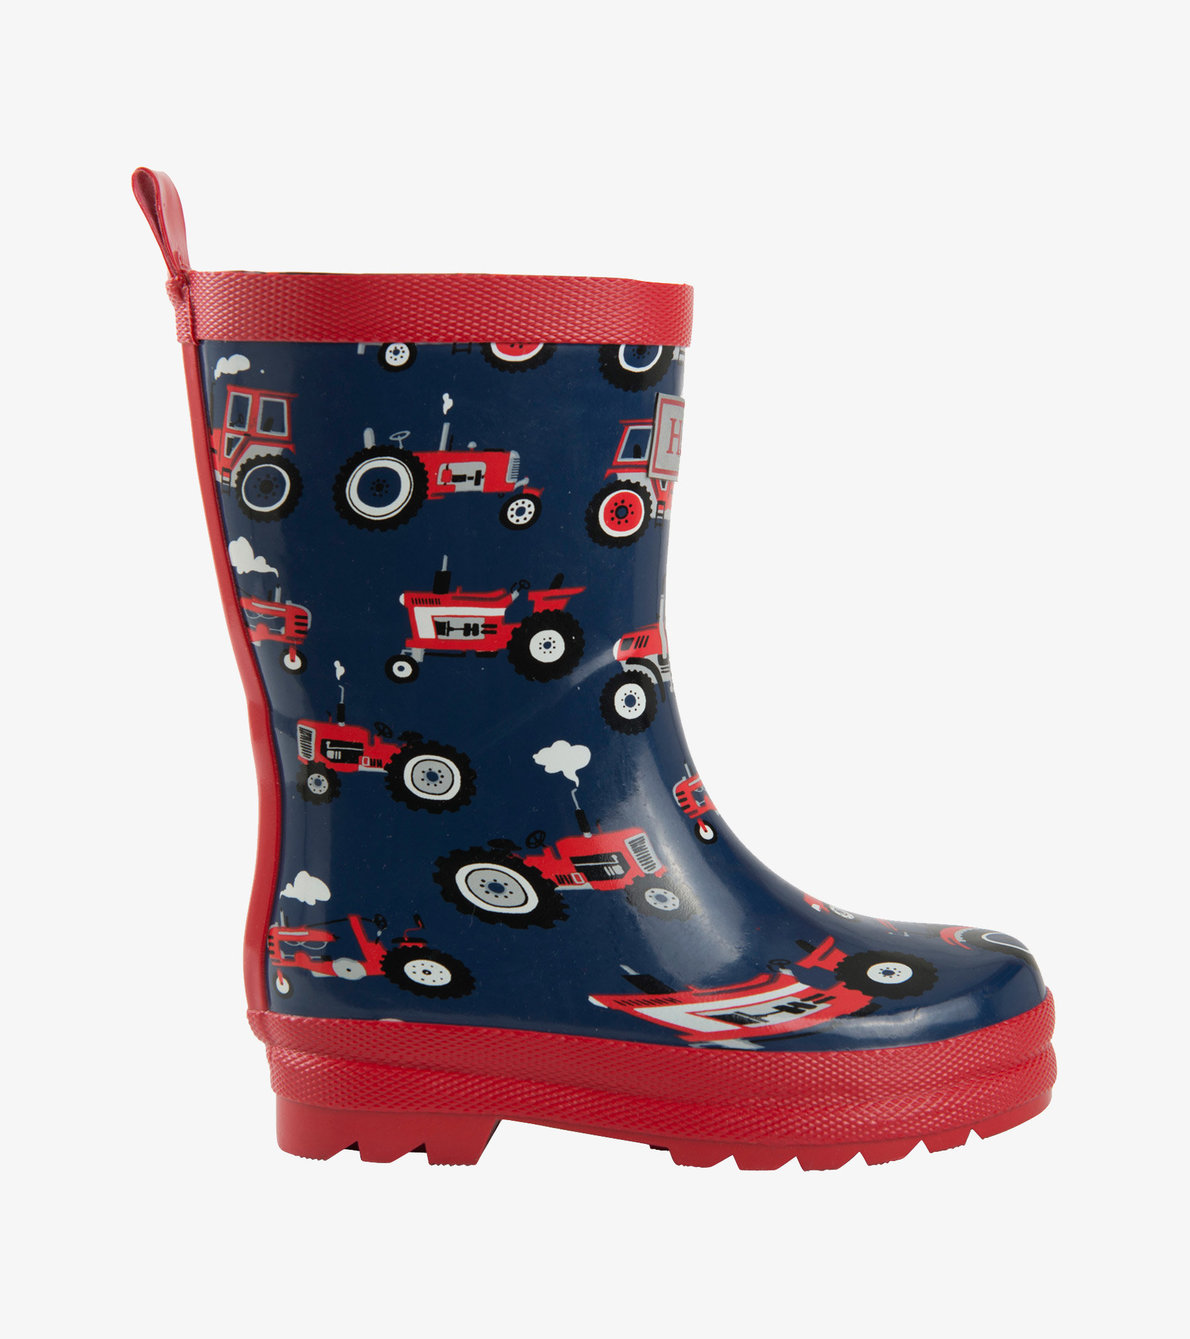 View larger image of Red Farm Tractors Rain Boots